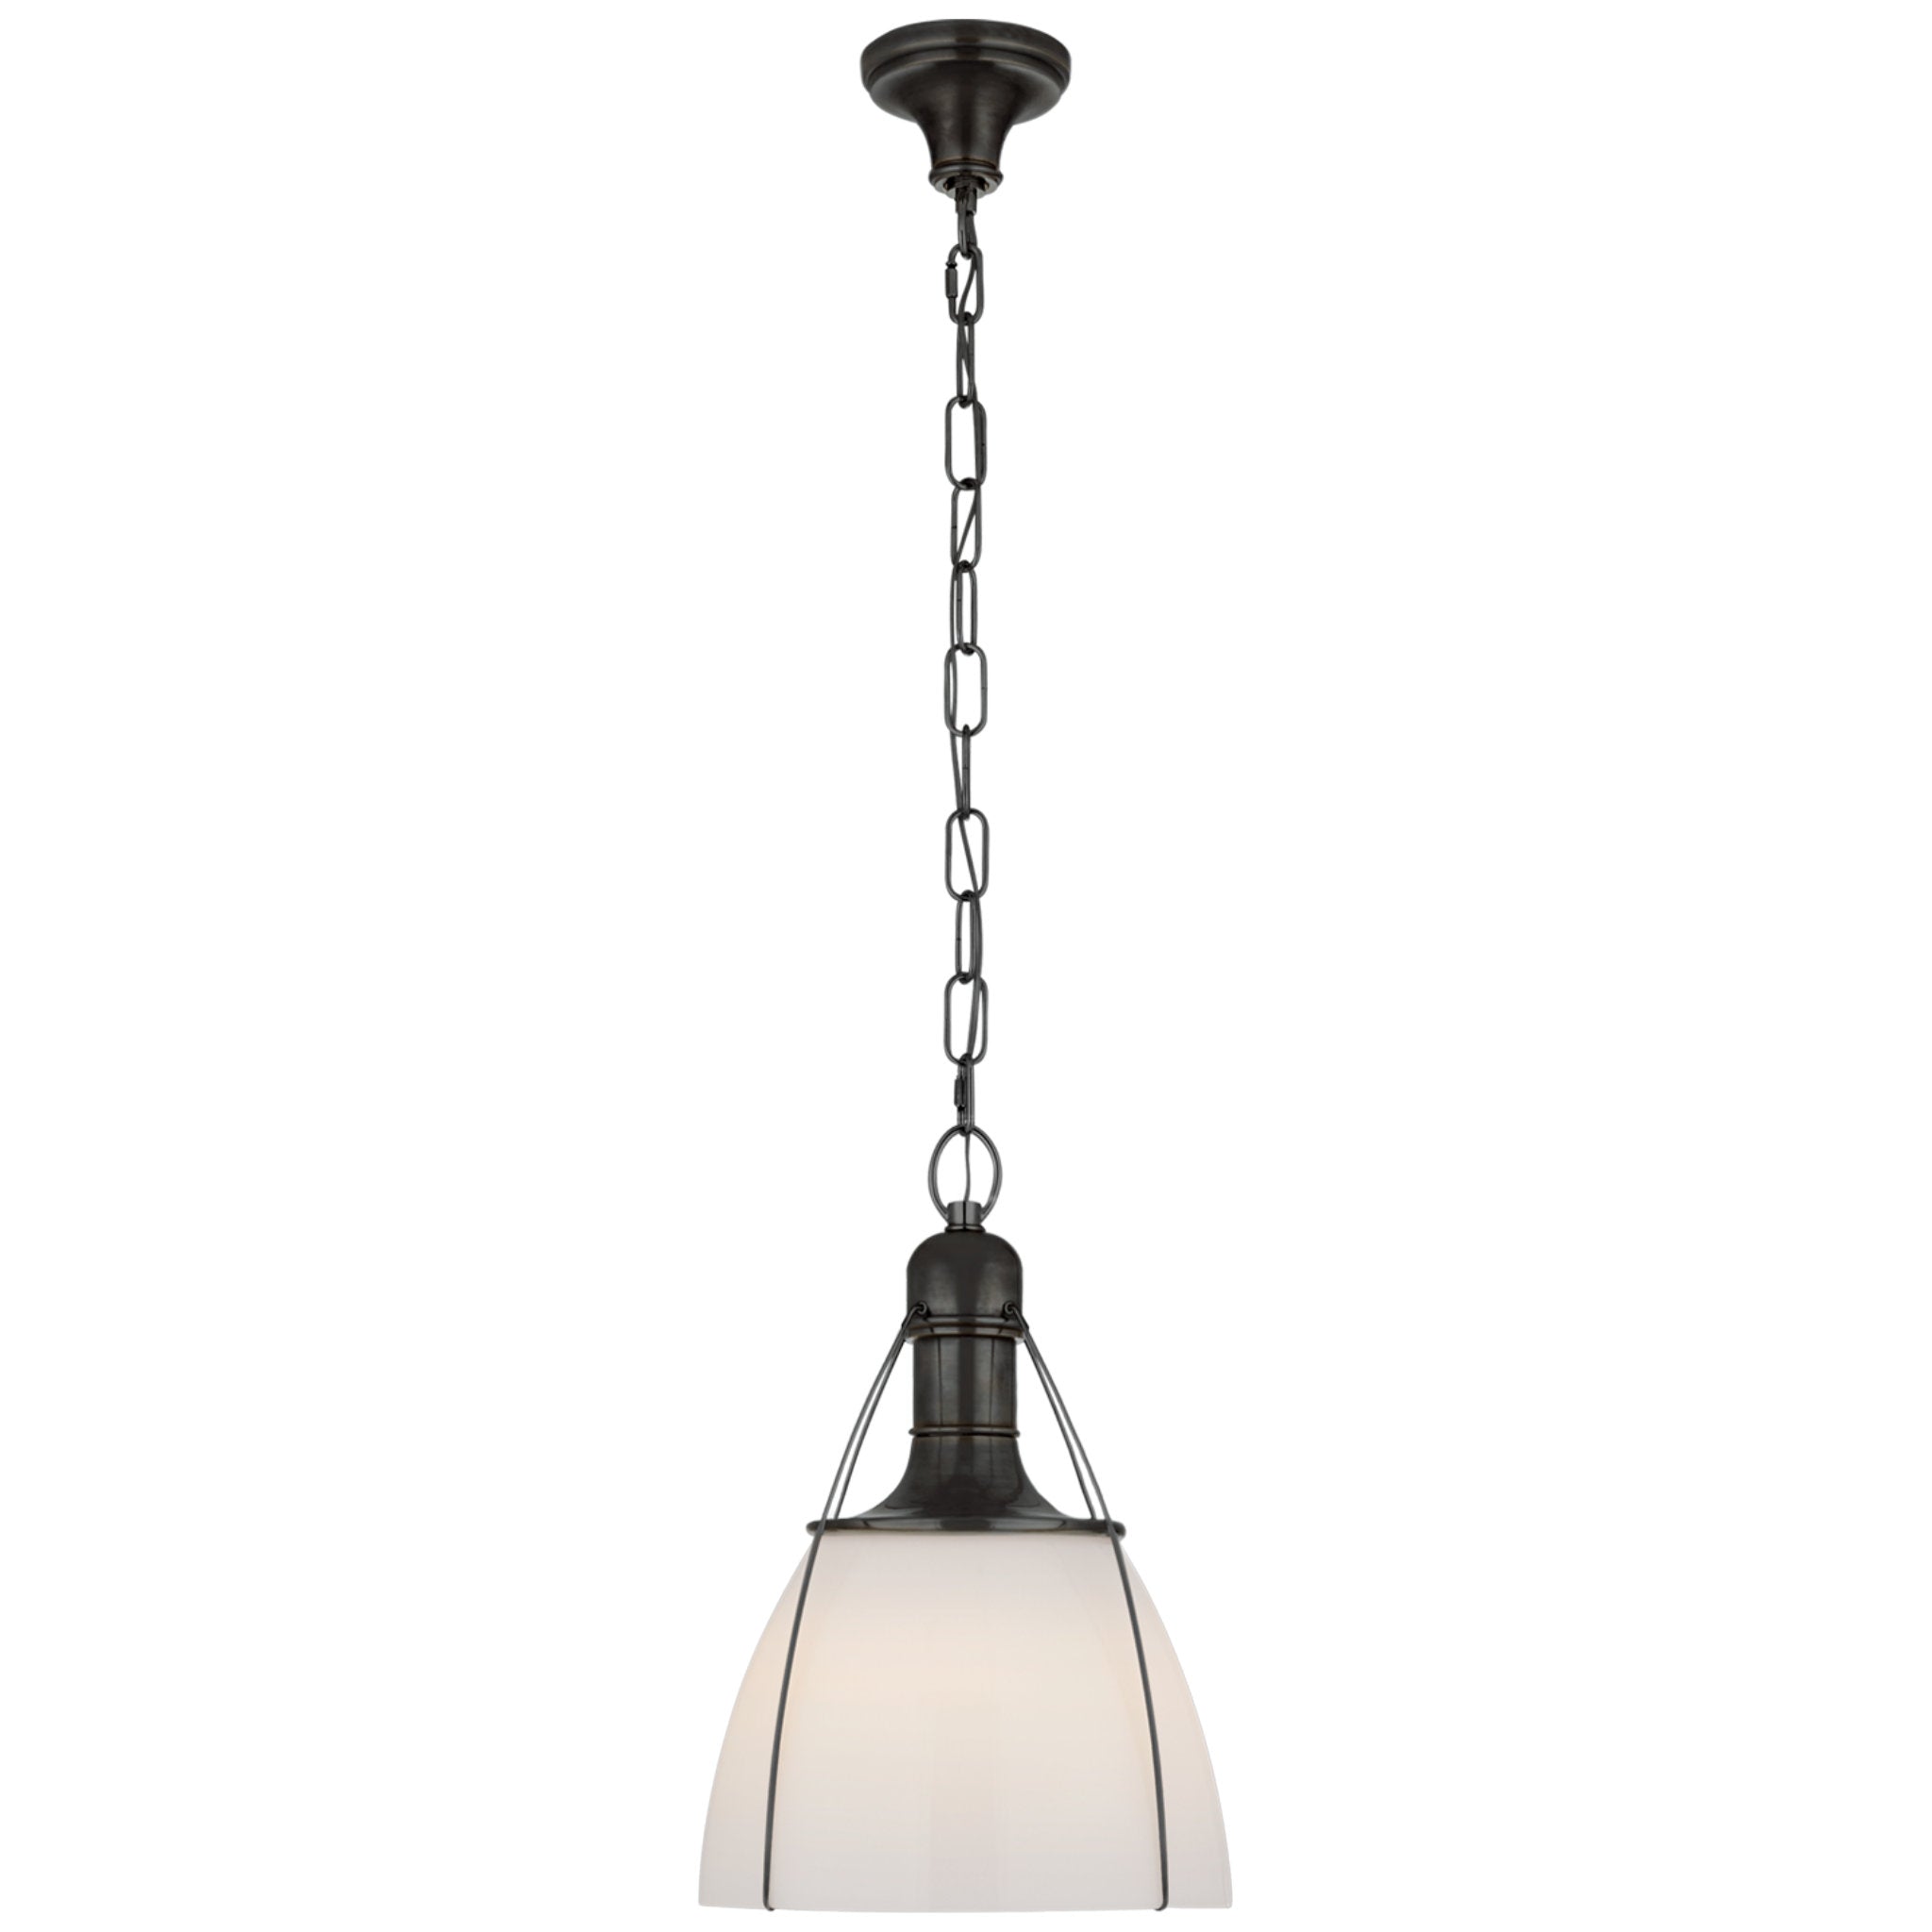 Chapman & Myers Prestwick 14" Pendant in Bronze with White Glass